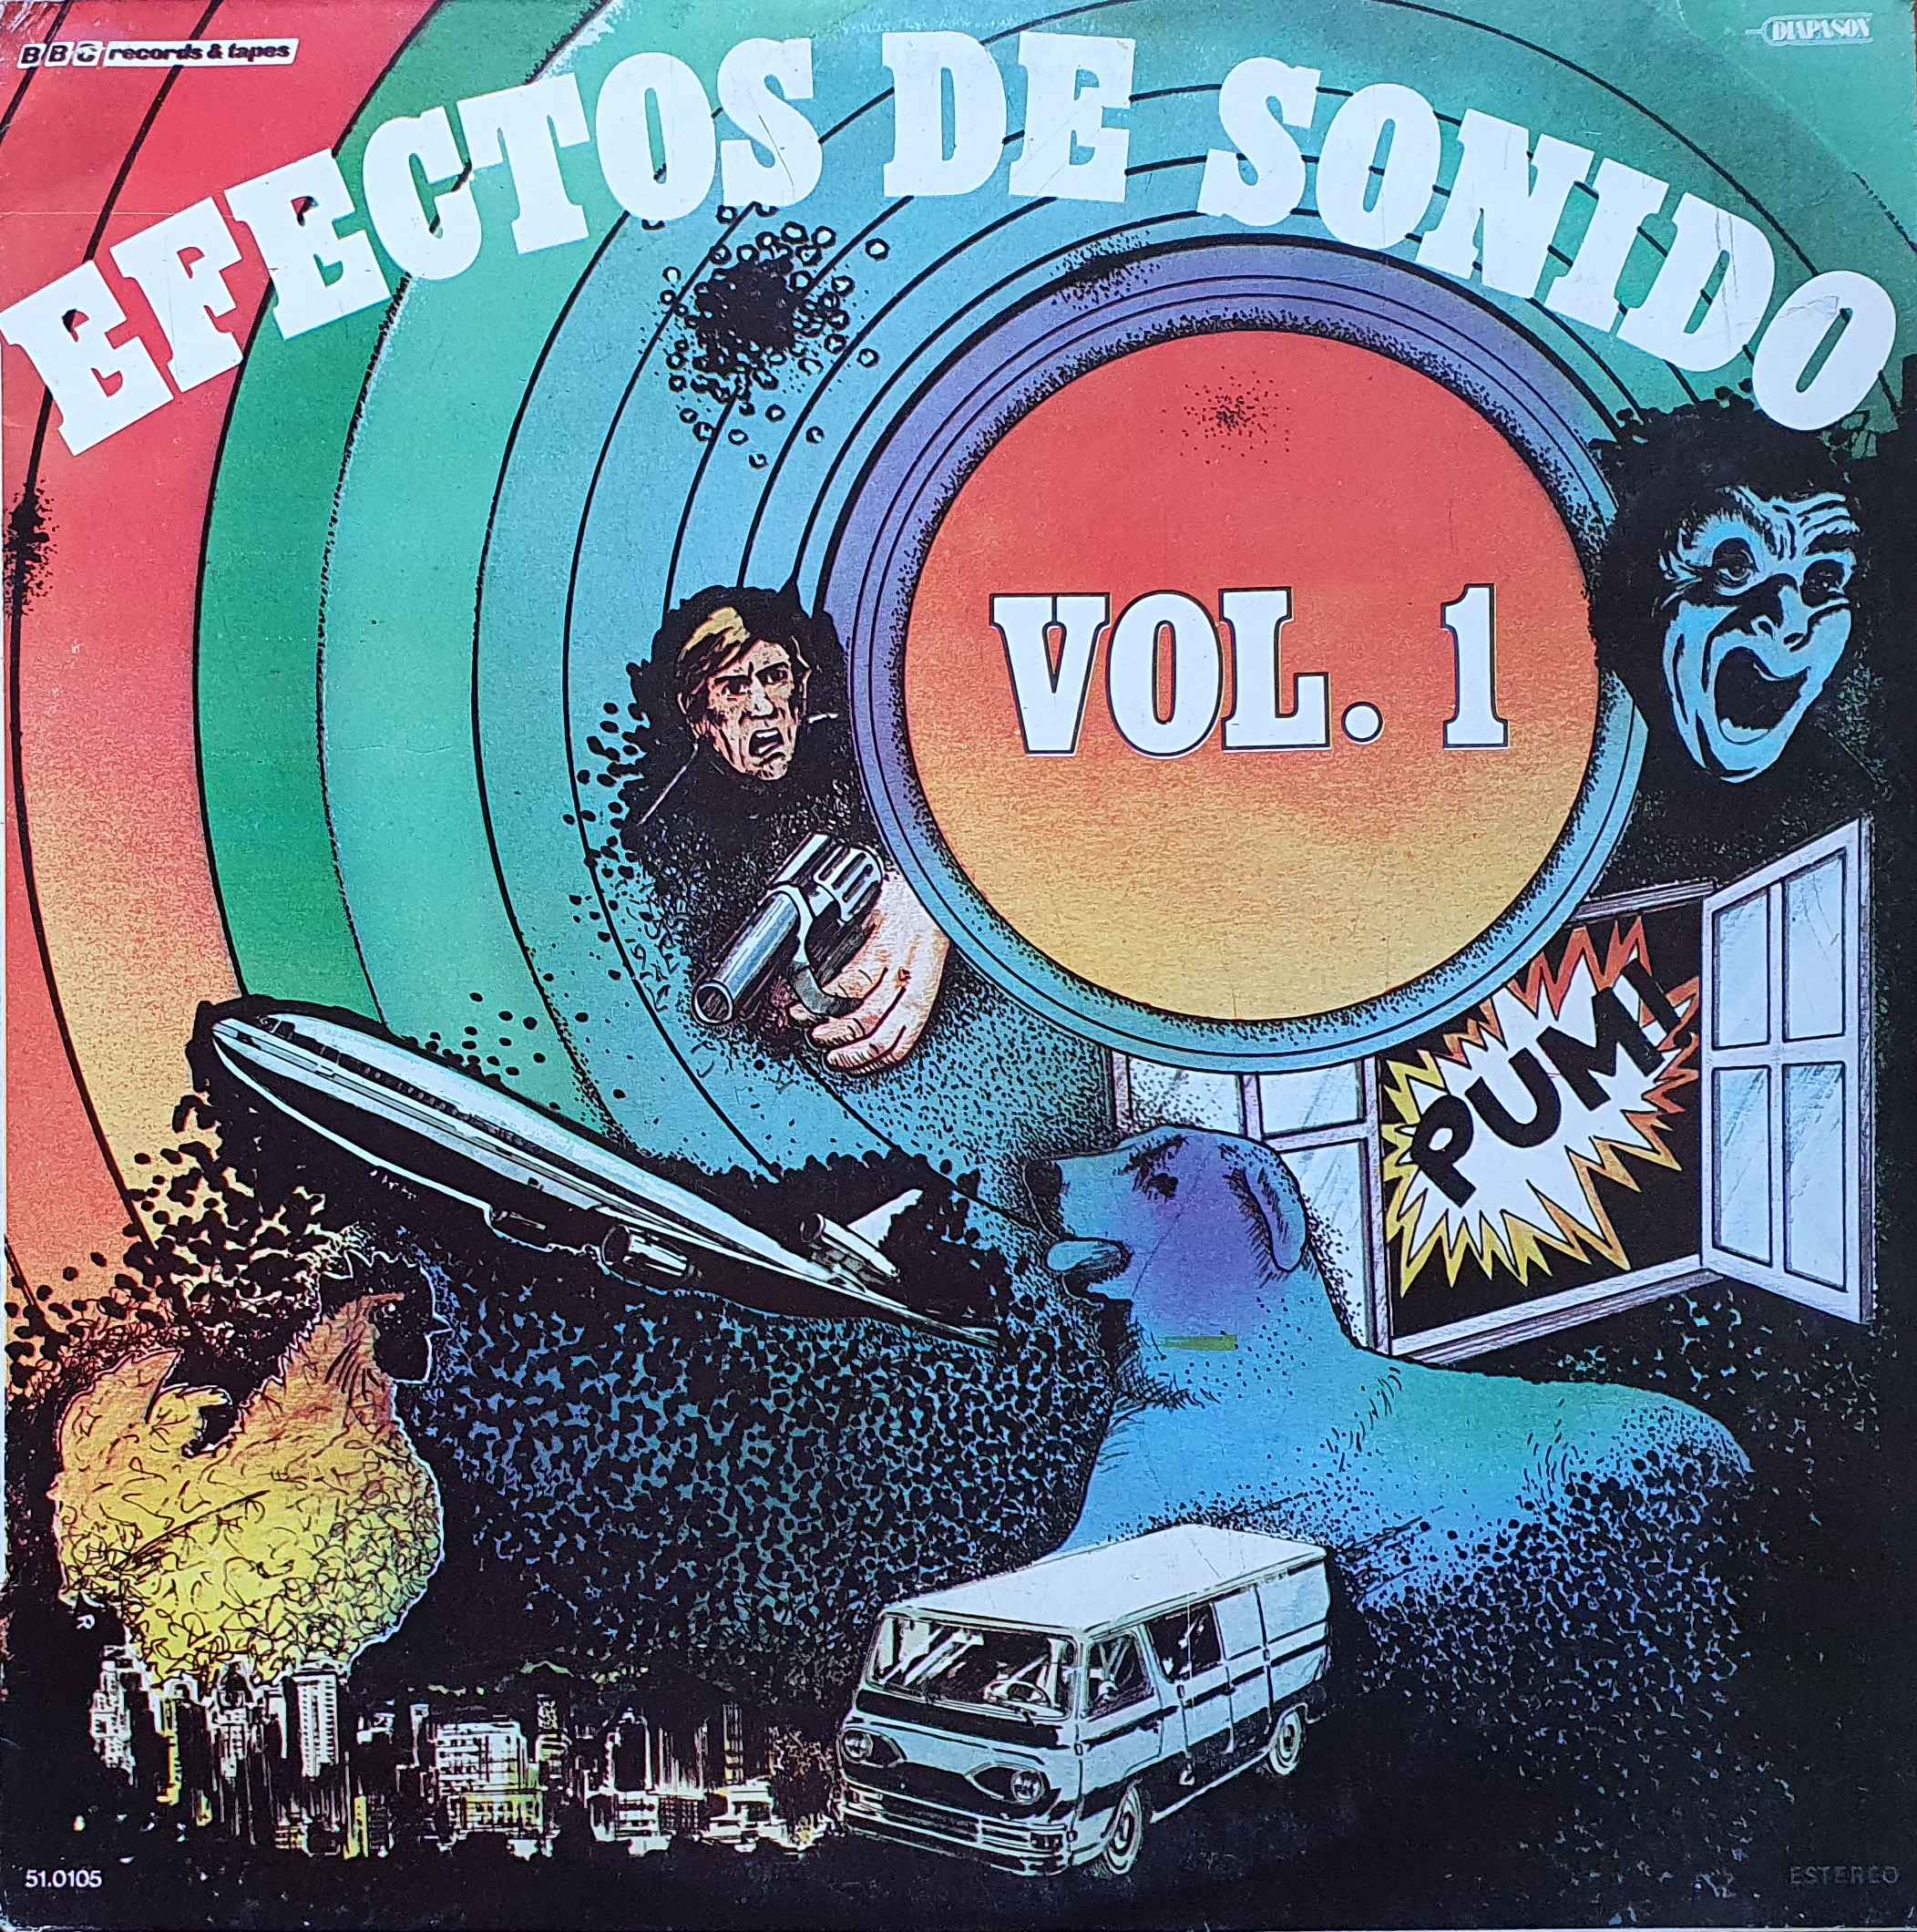 Picture of 51.0105 Efectos De Sonido No 1 (Spanish import) by artist Various from the BBC albums - Records and Tapes library